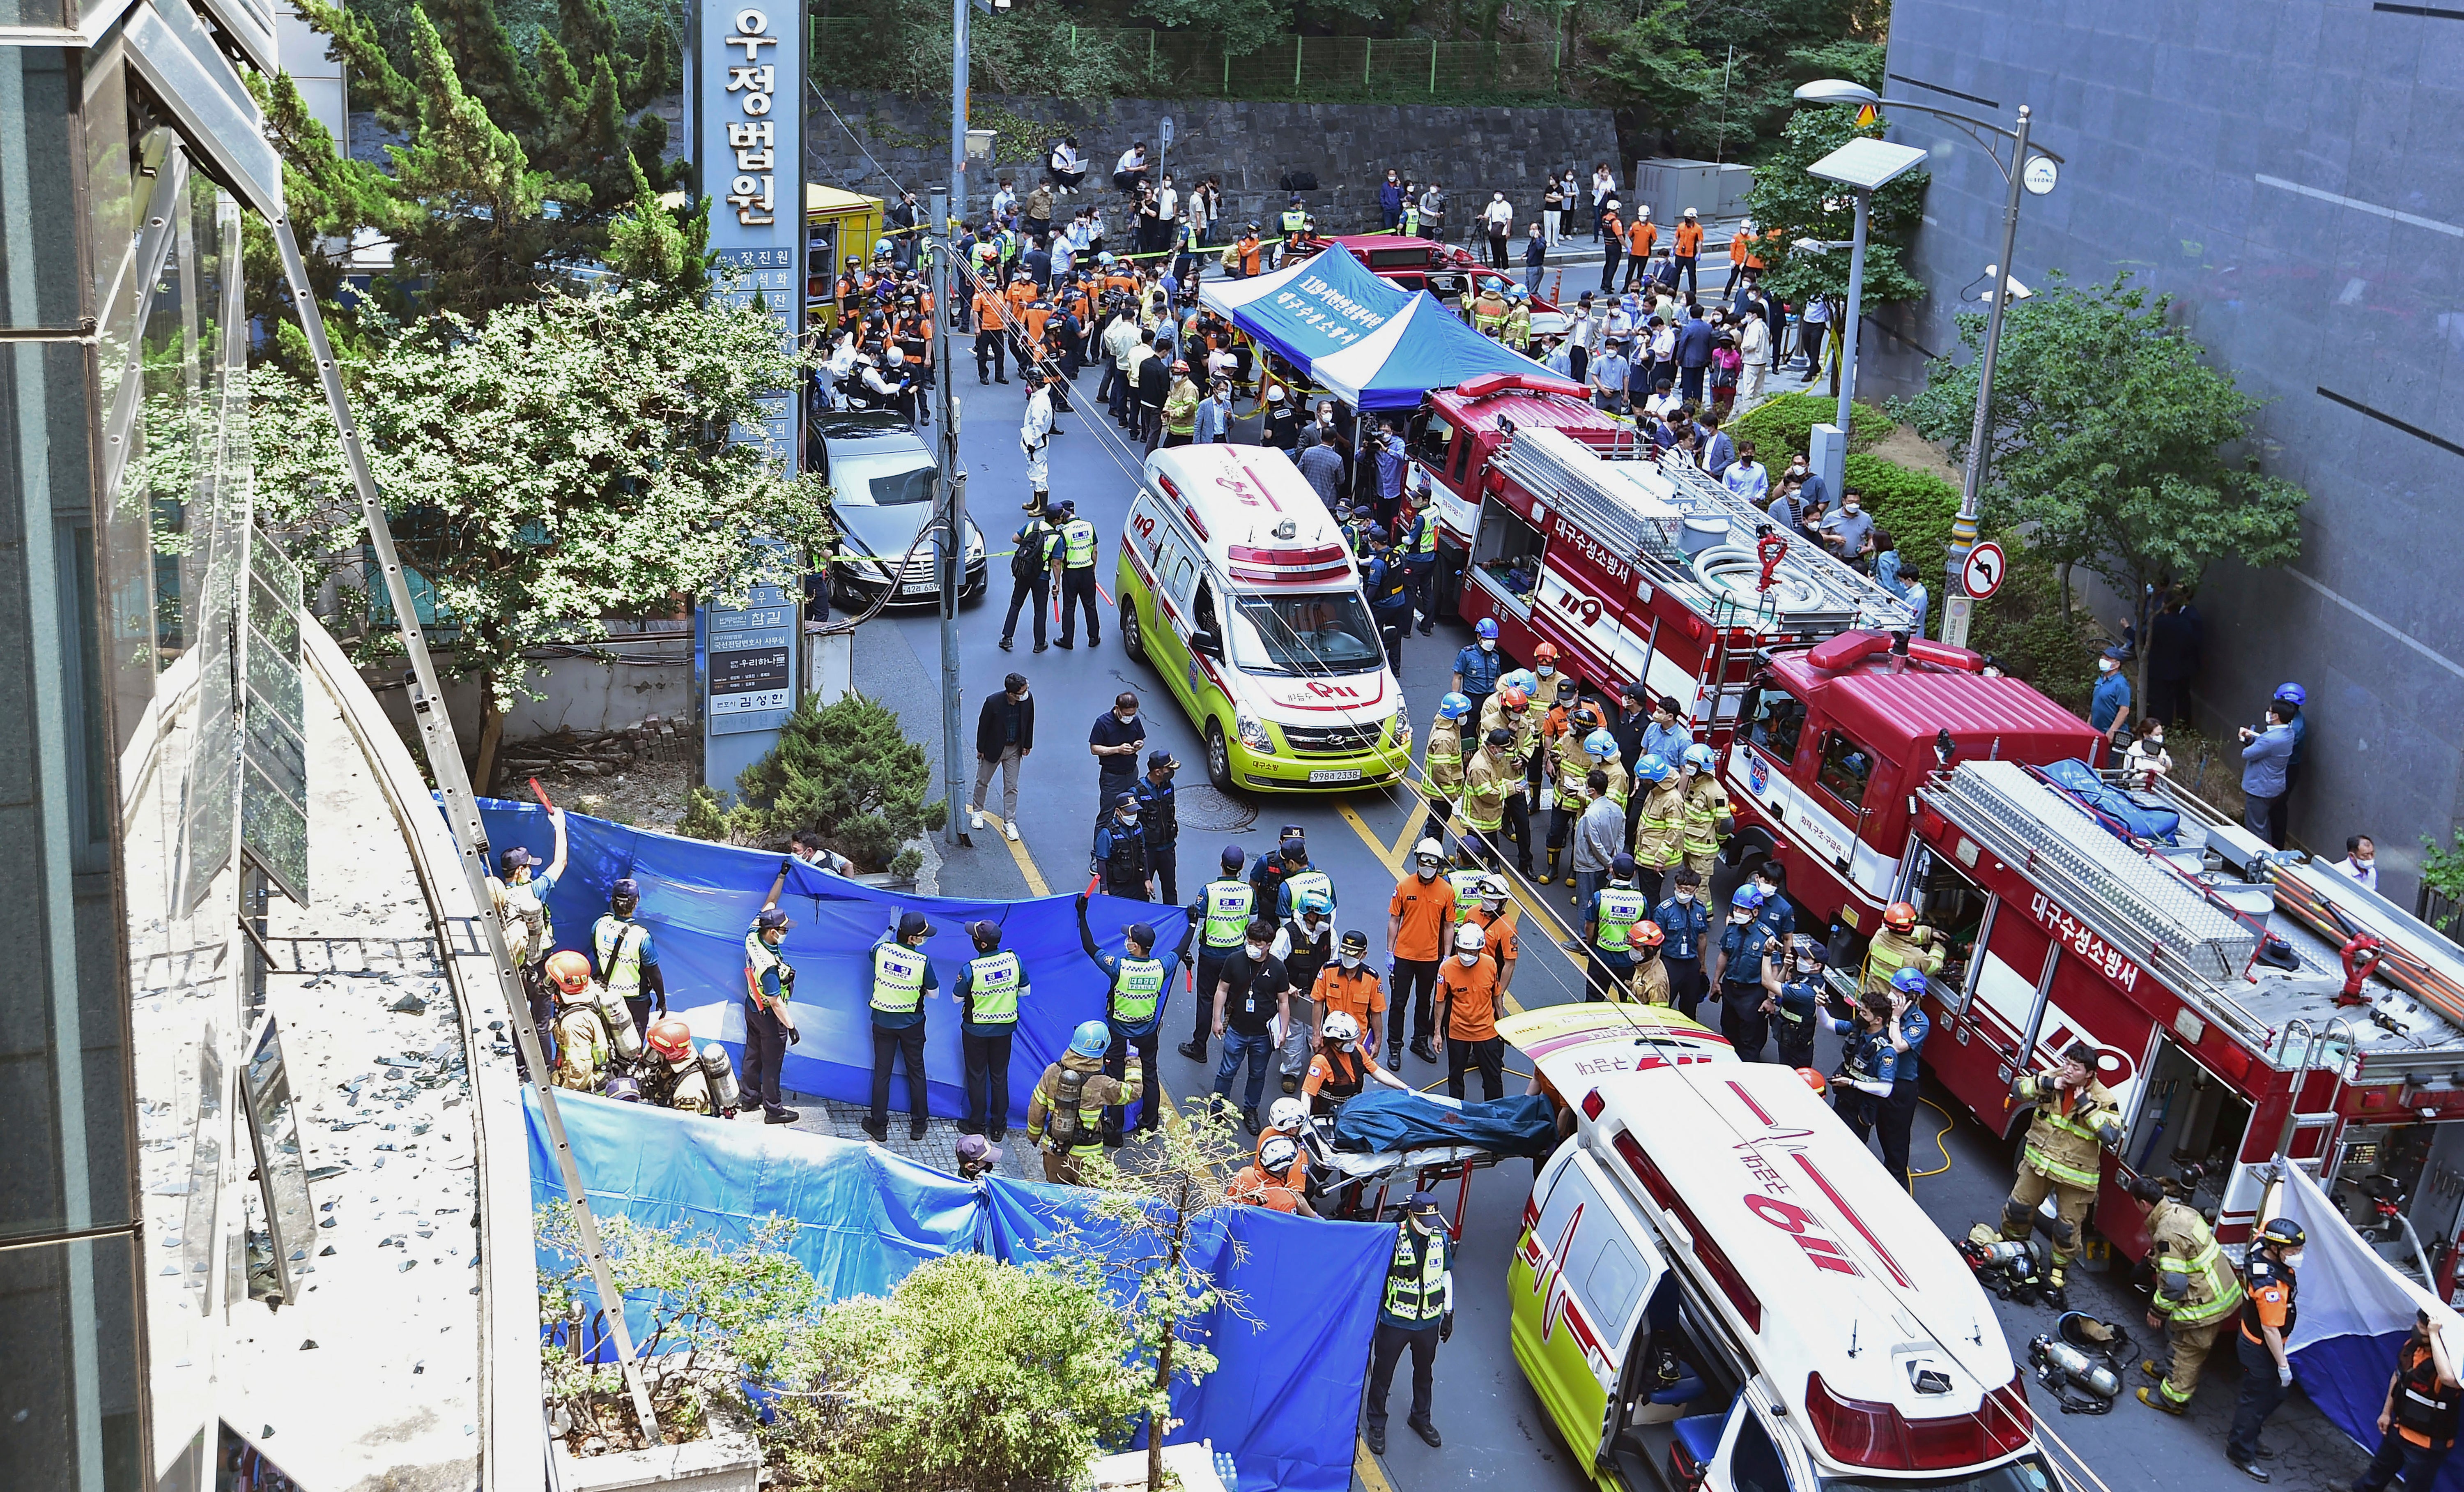 South Korean rescue teams and firefighters work at the scene in Daegu on 9 June